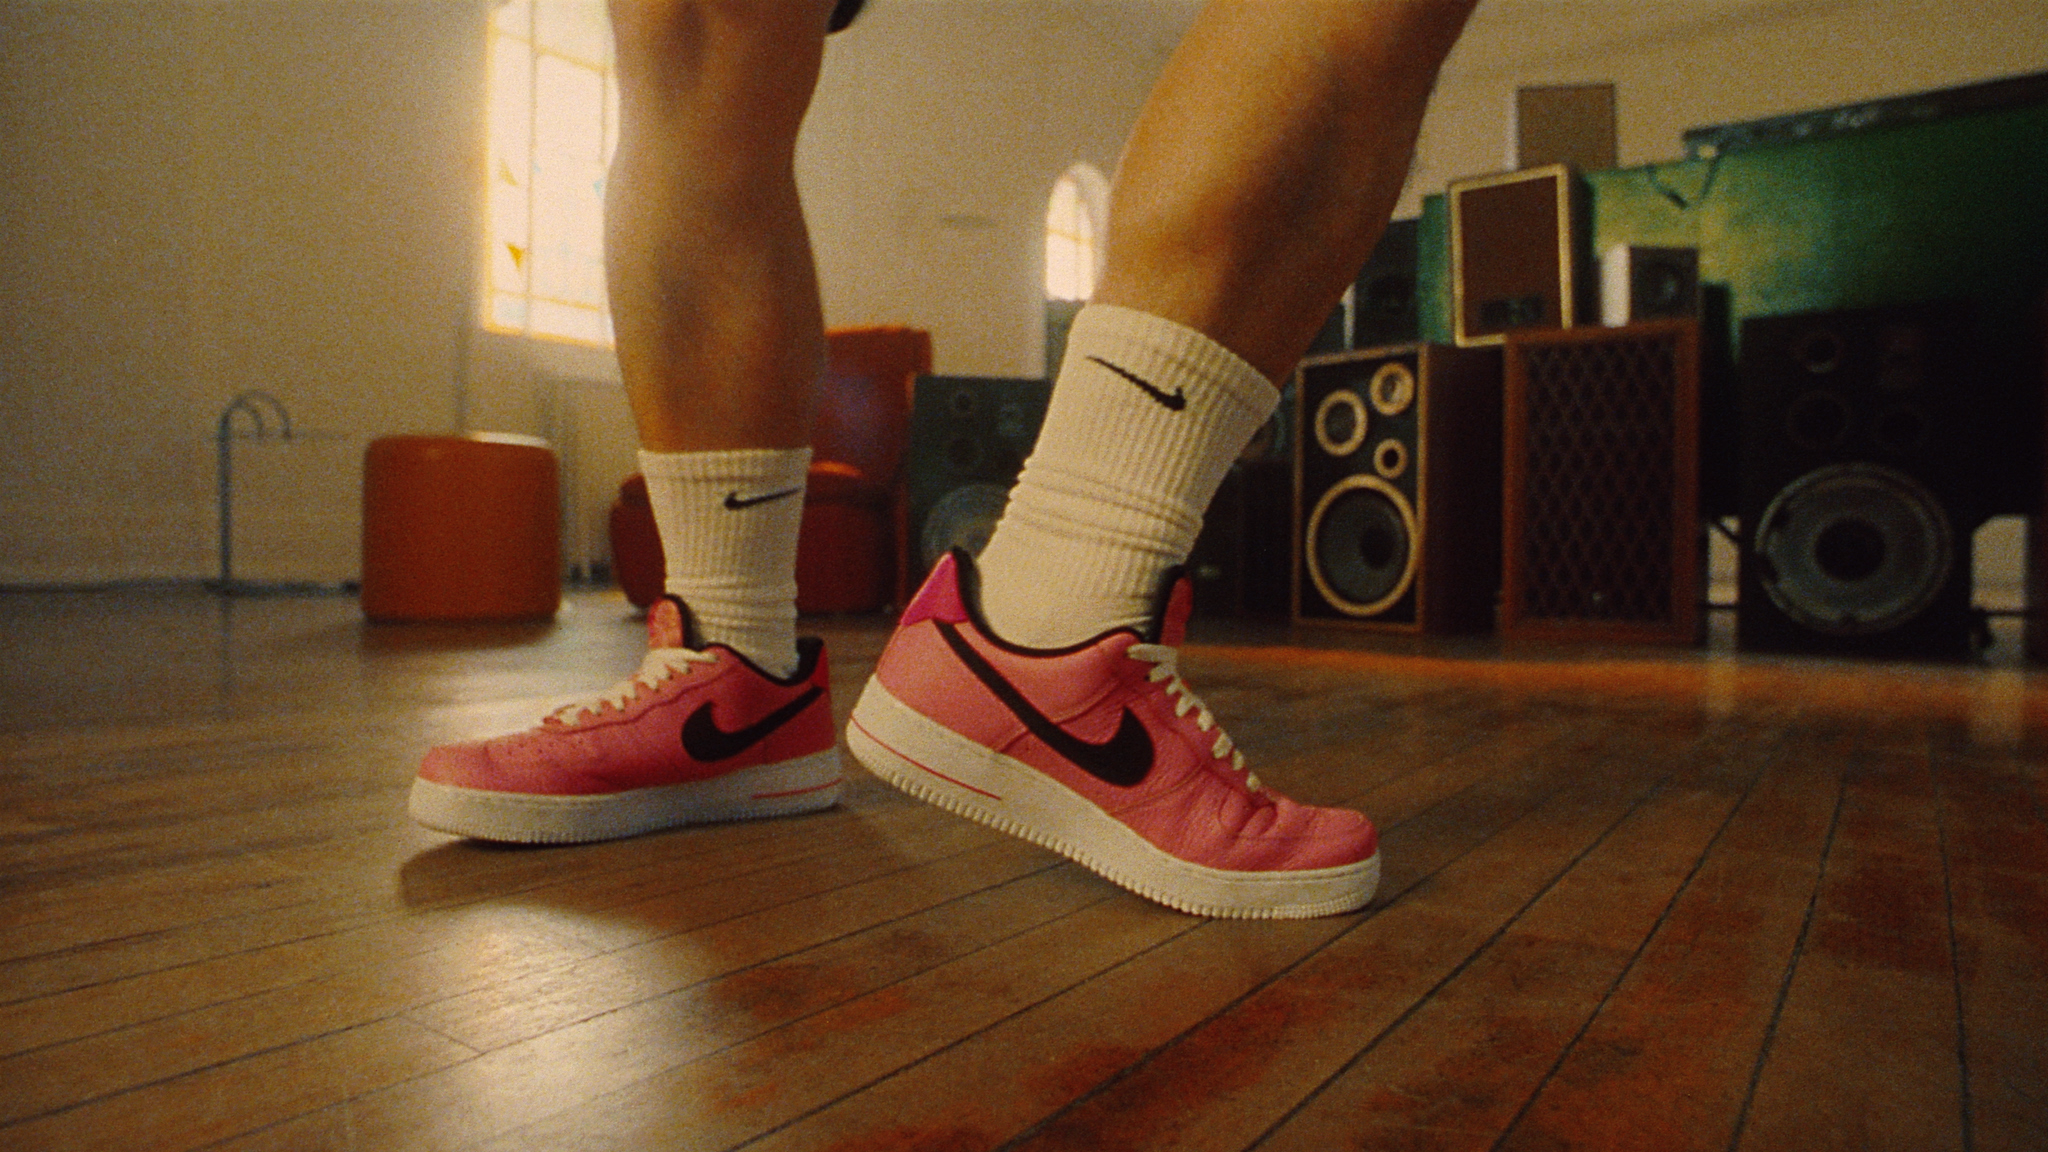 110422_Nike Join Forces_FILM OUT COLOR.mov.01_00_46_06.Still018.png